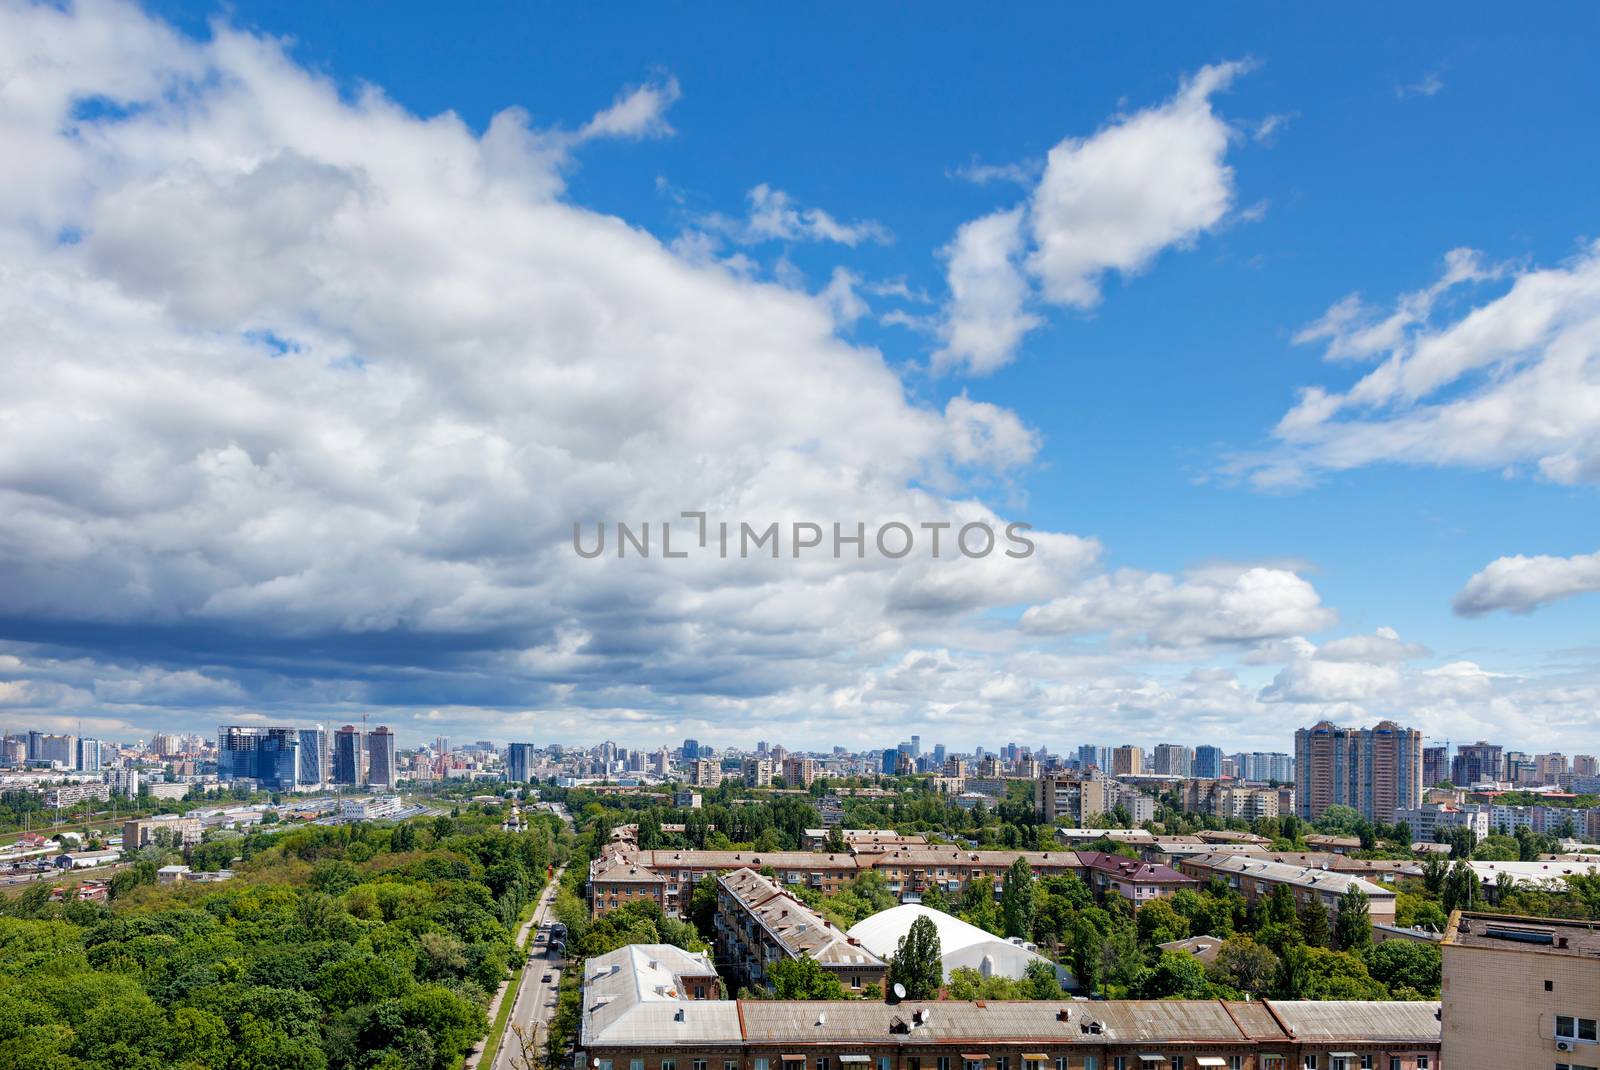 Panoramic view of Kyiv city in summer at noon with a green park in an old residential area and new buildings on the horizon with a blue cloudy sky. Bird's-eye view. Copy space.